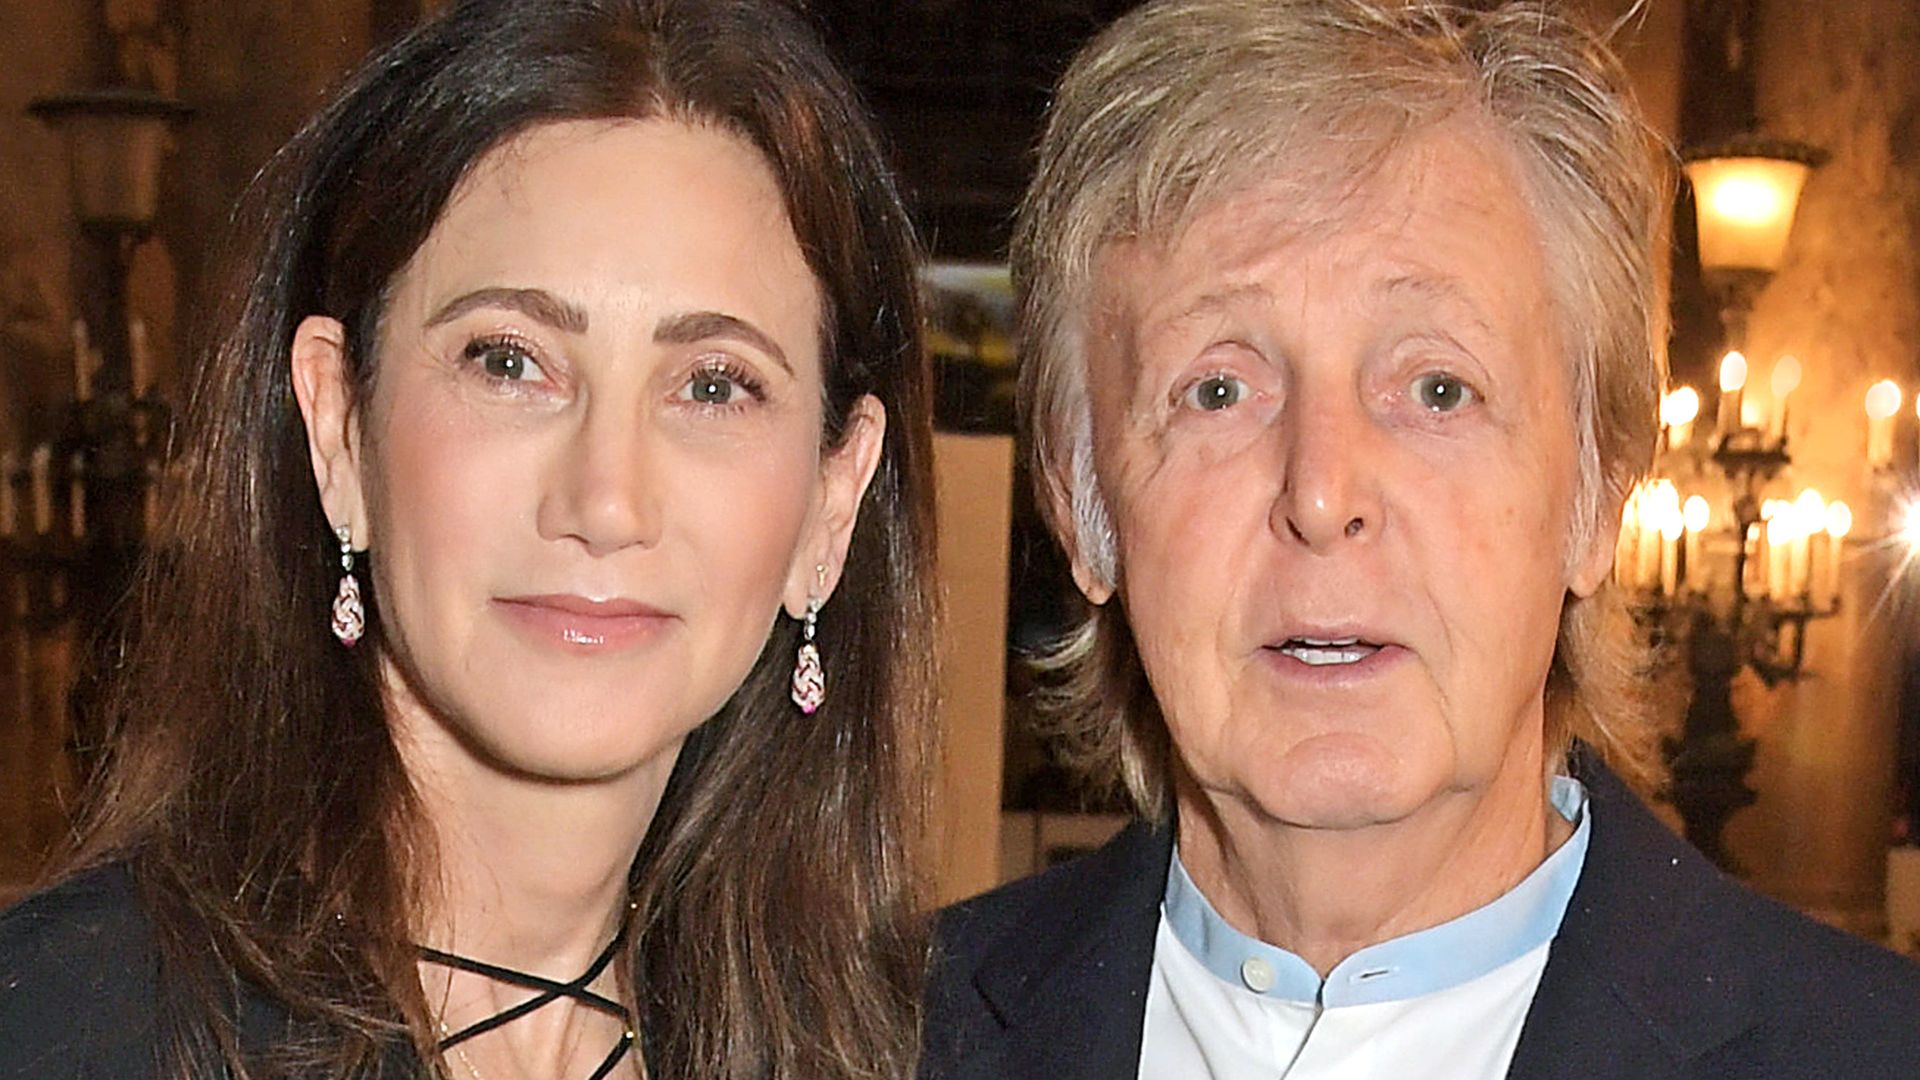 Paul McCartney's rare outing with glam wife Nancy Shevell and daughter Stella – backstage photos